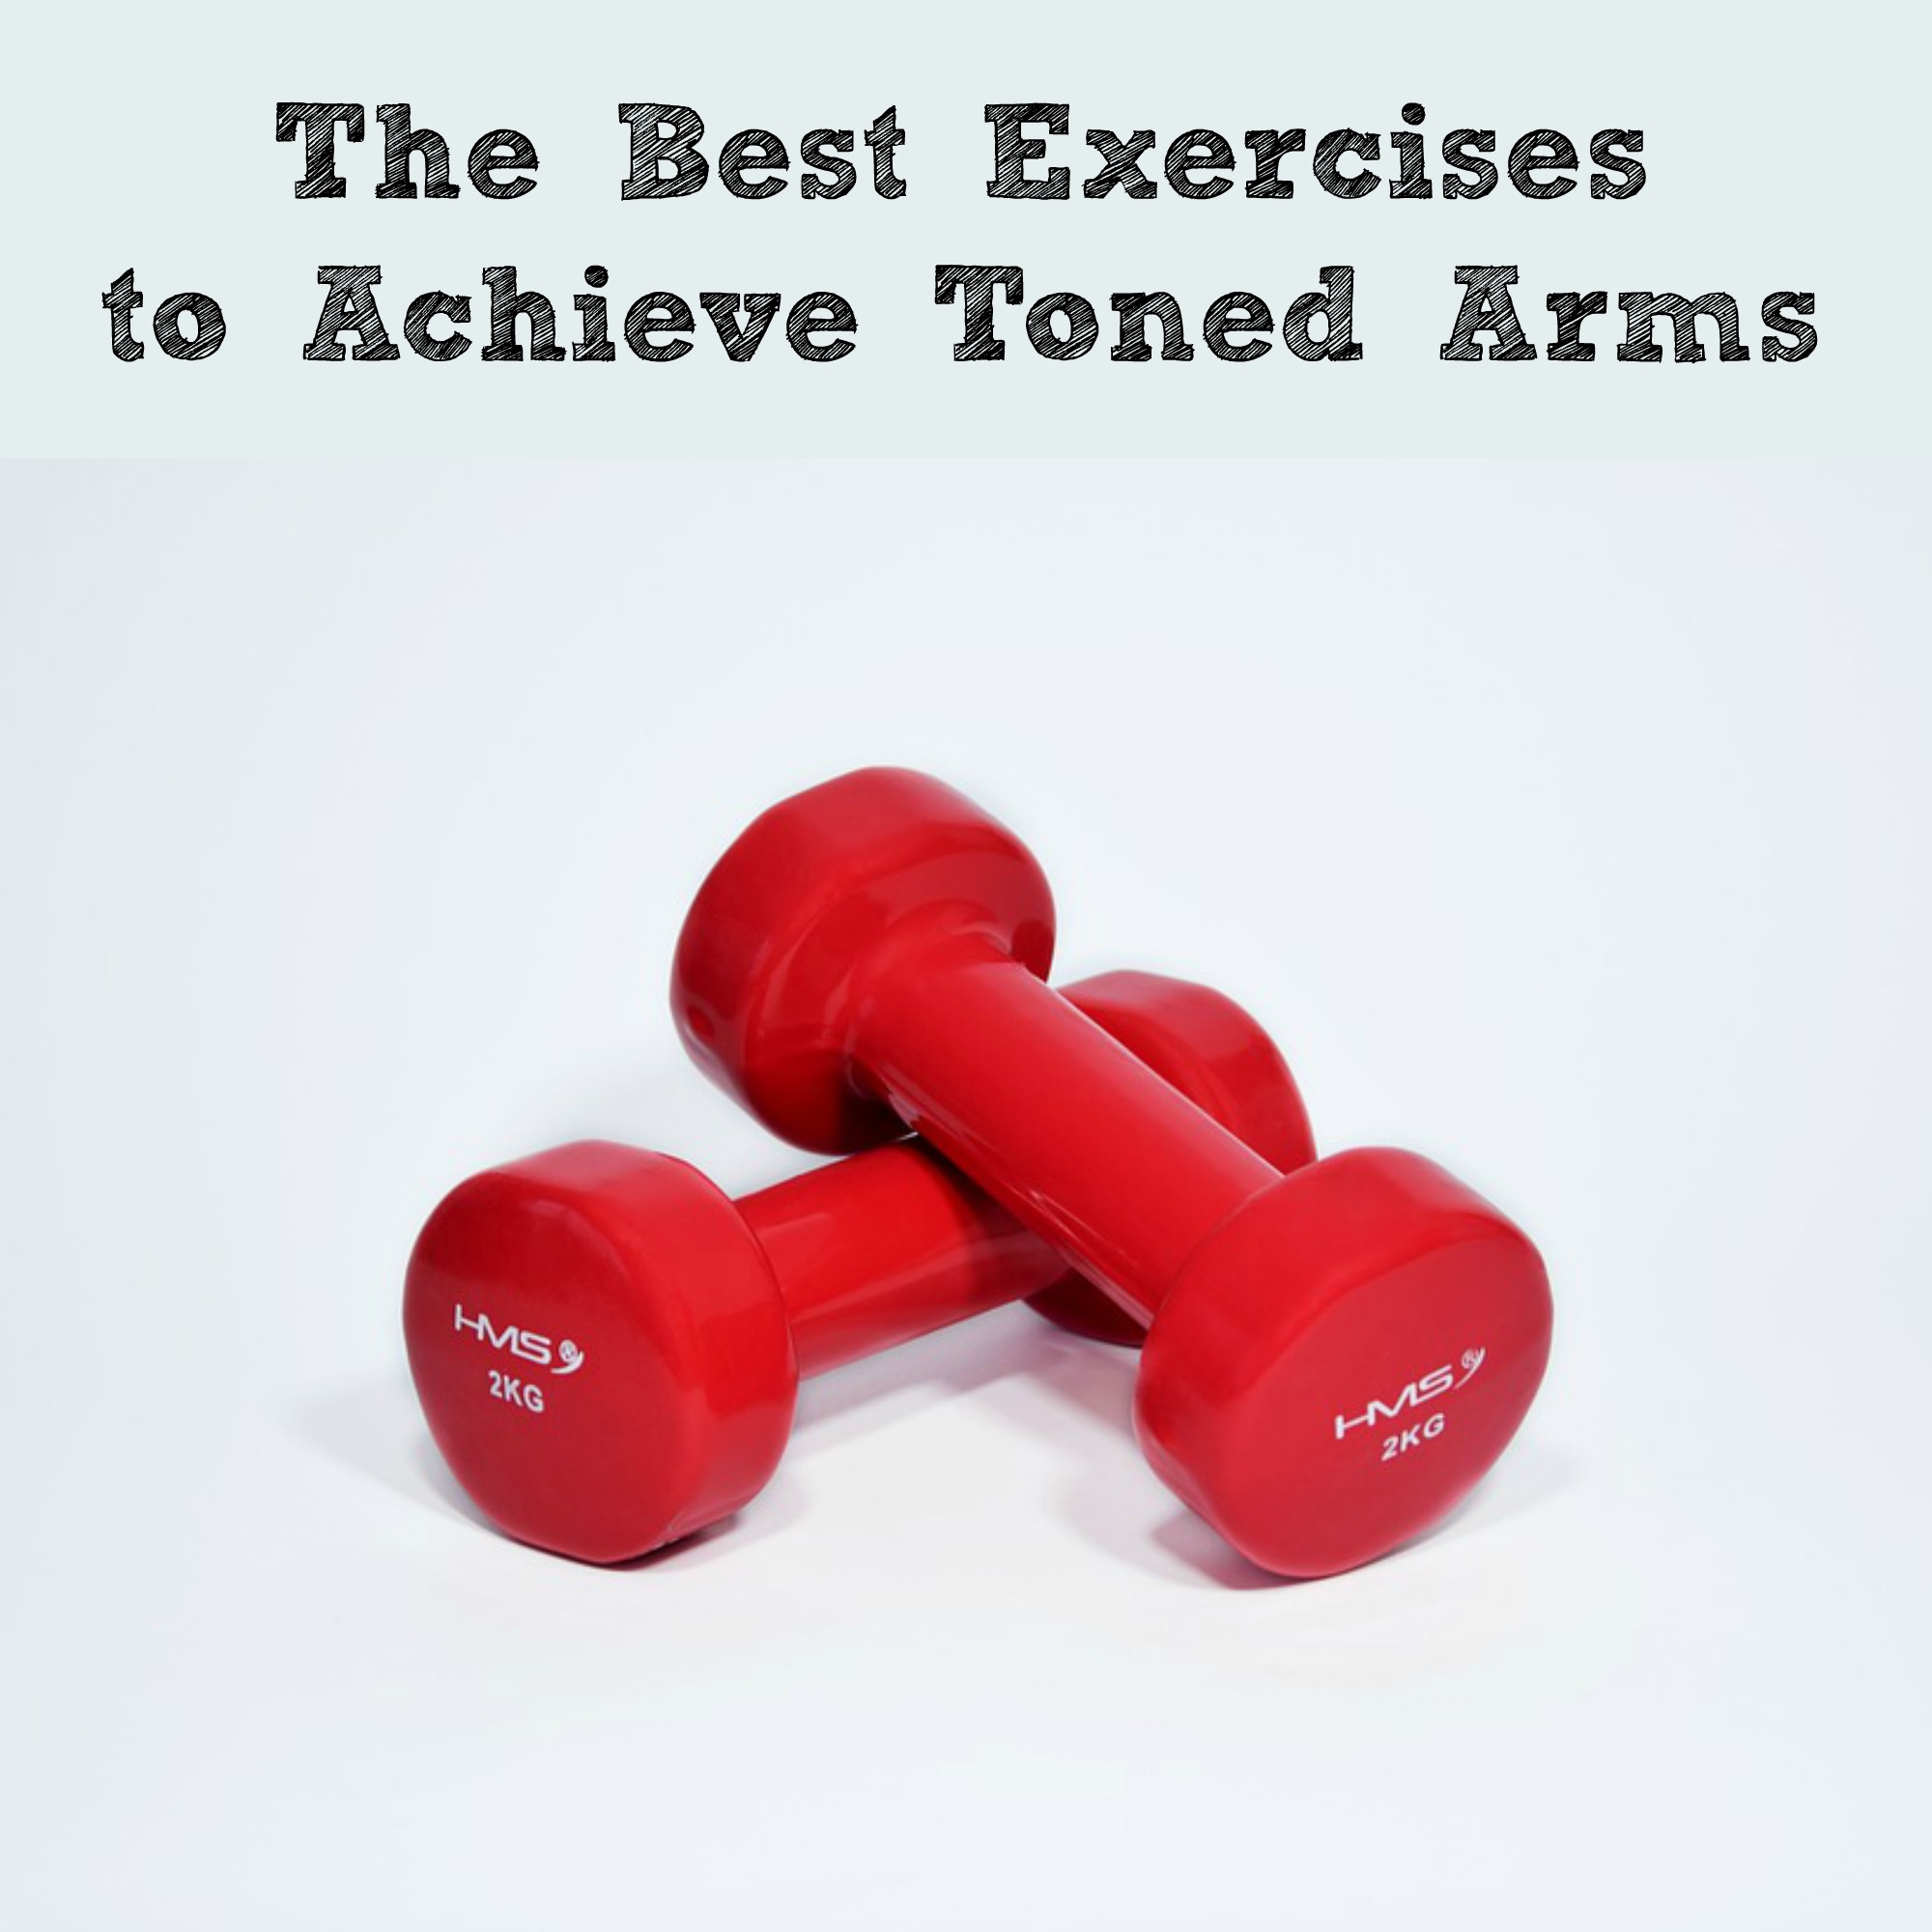 Exercises to Achieve Toned Arms